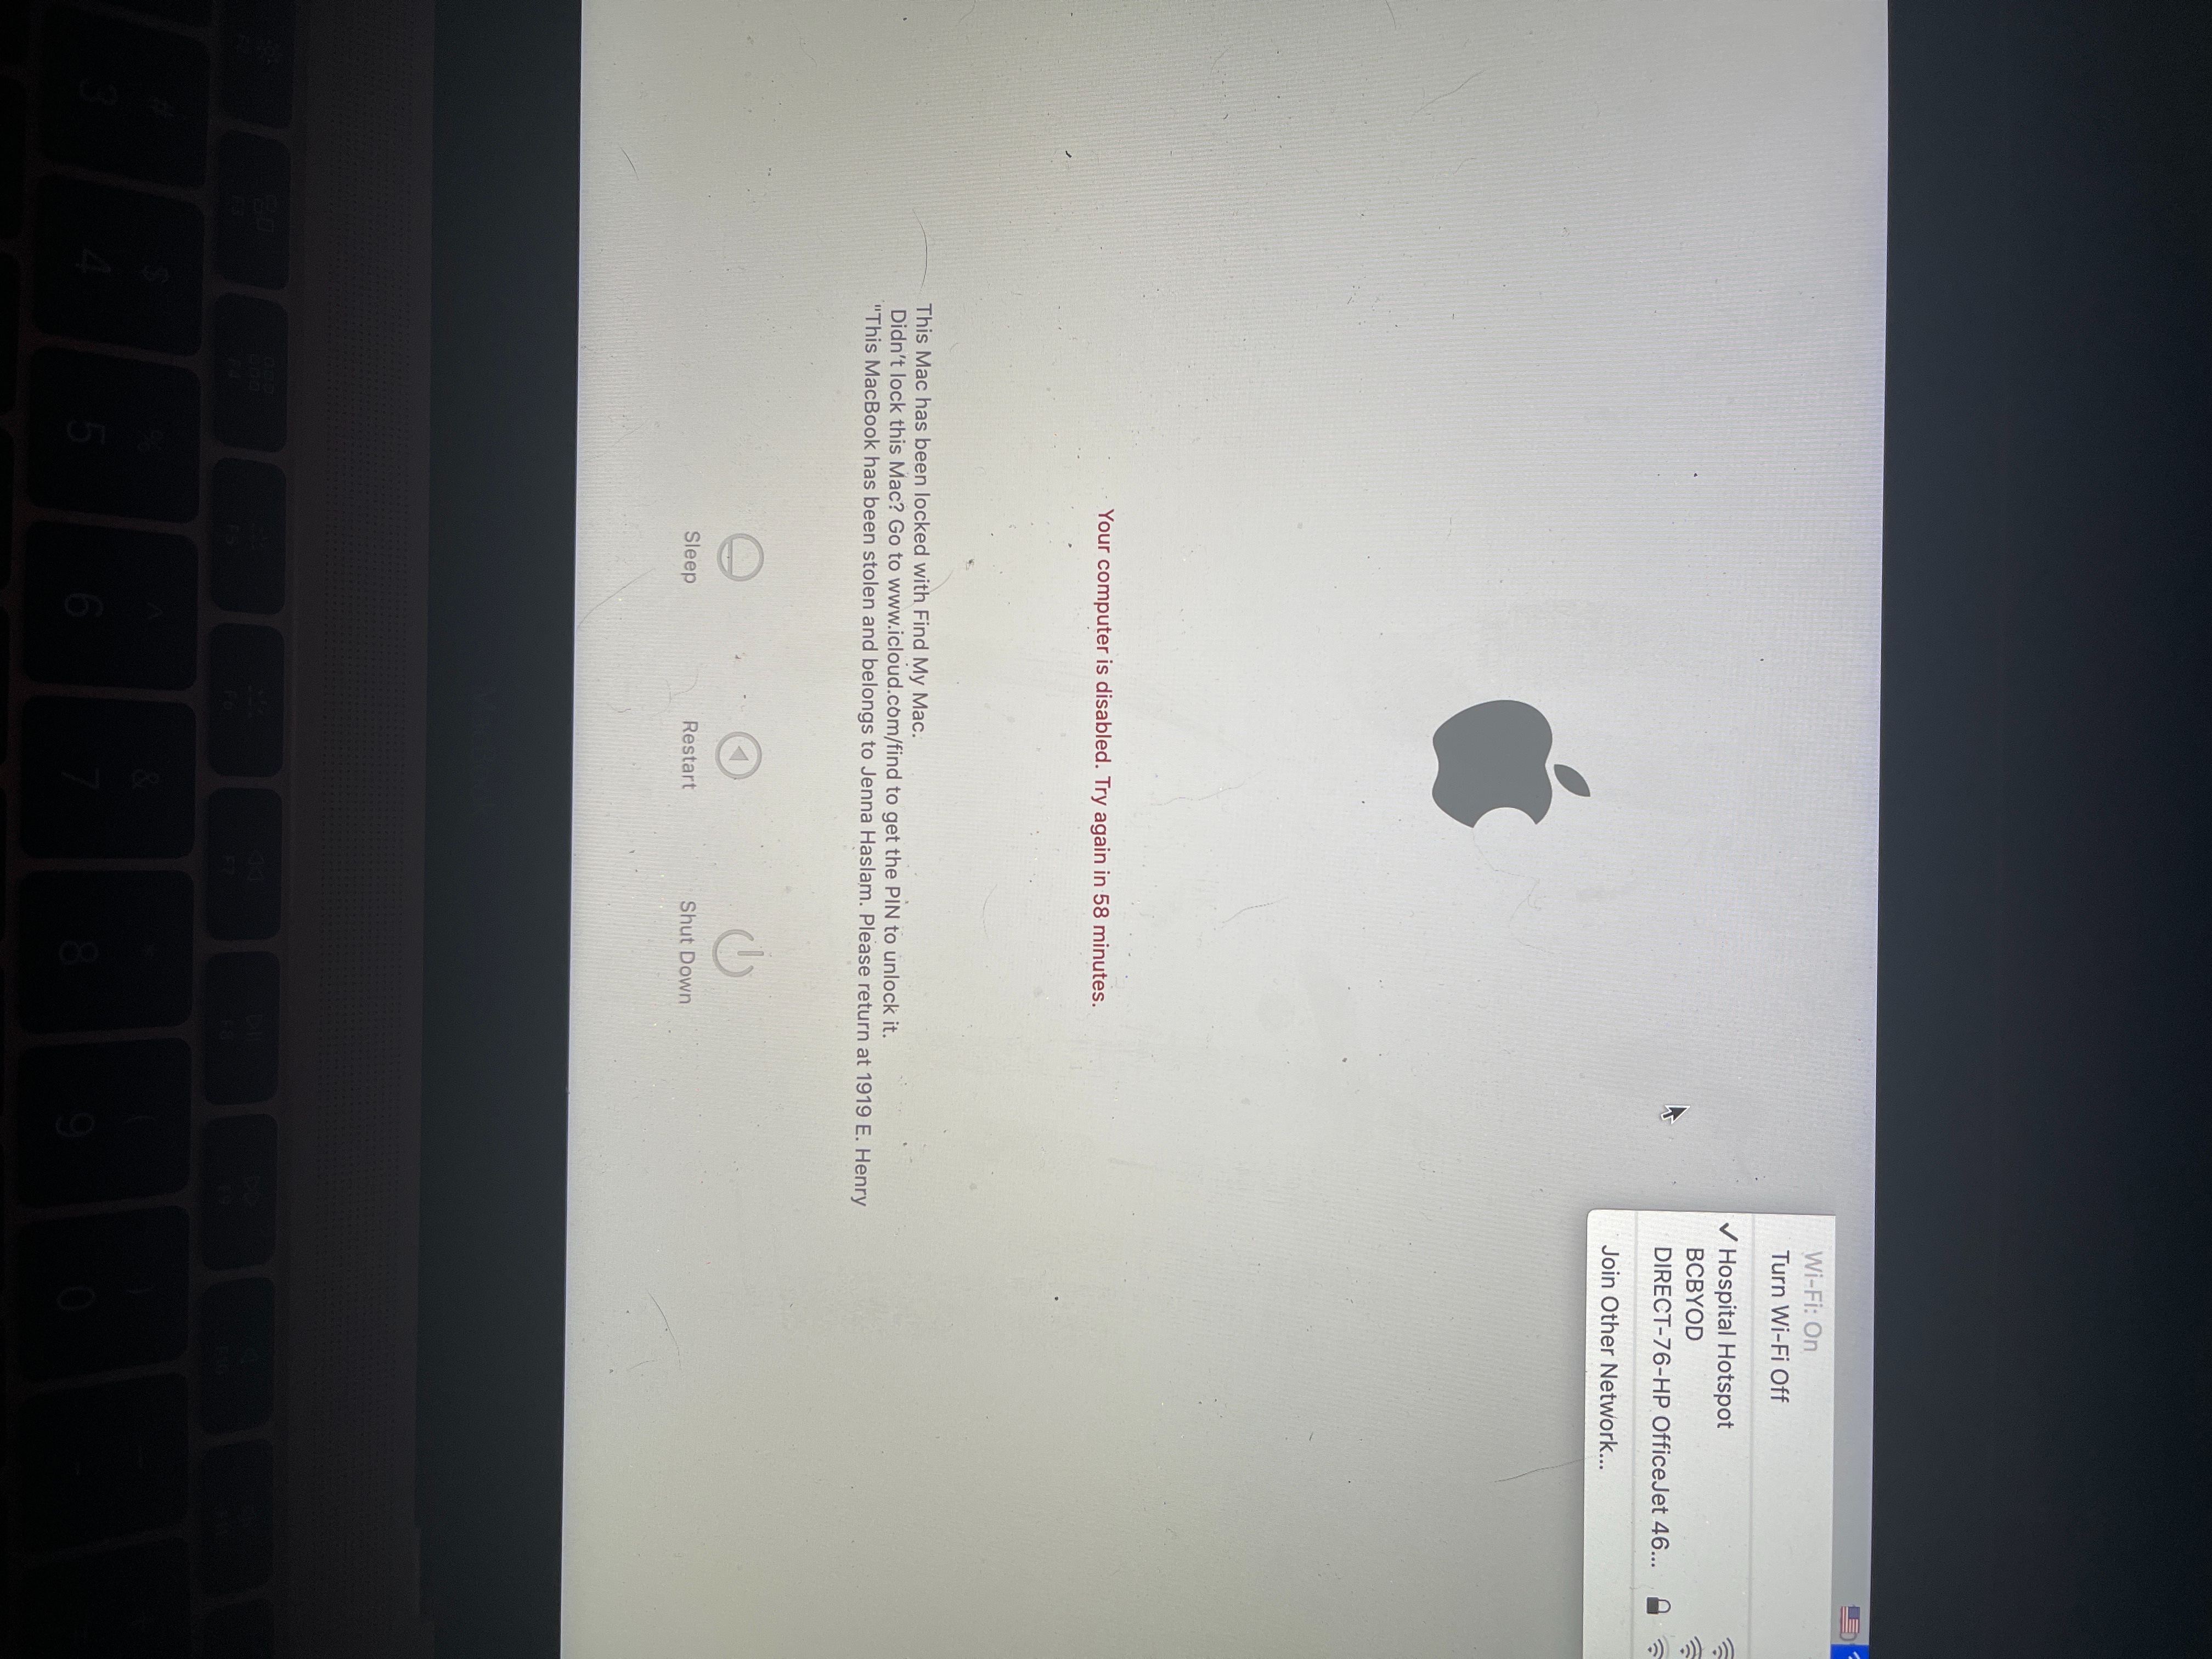 My Mac is locked out - Apple